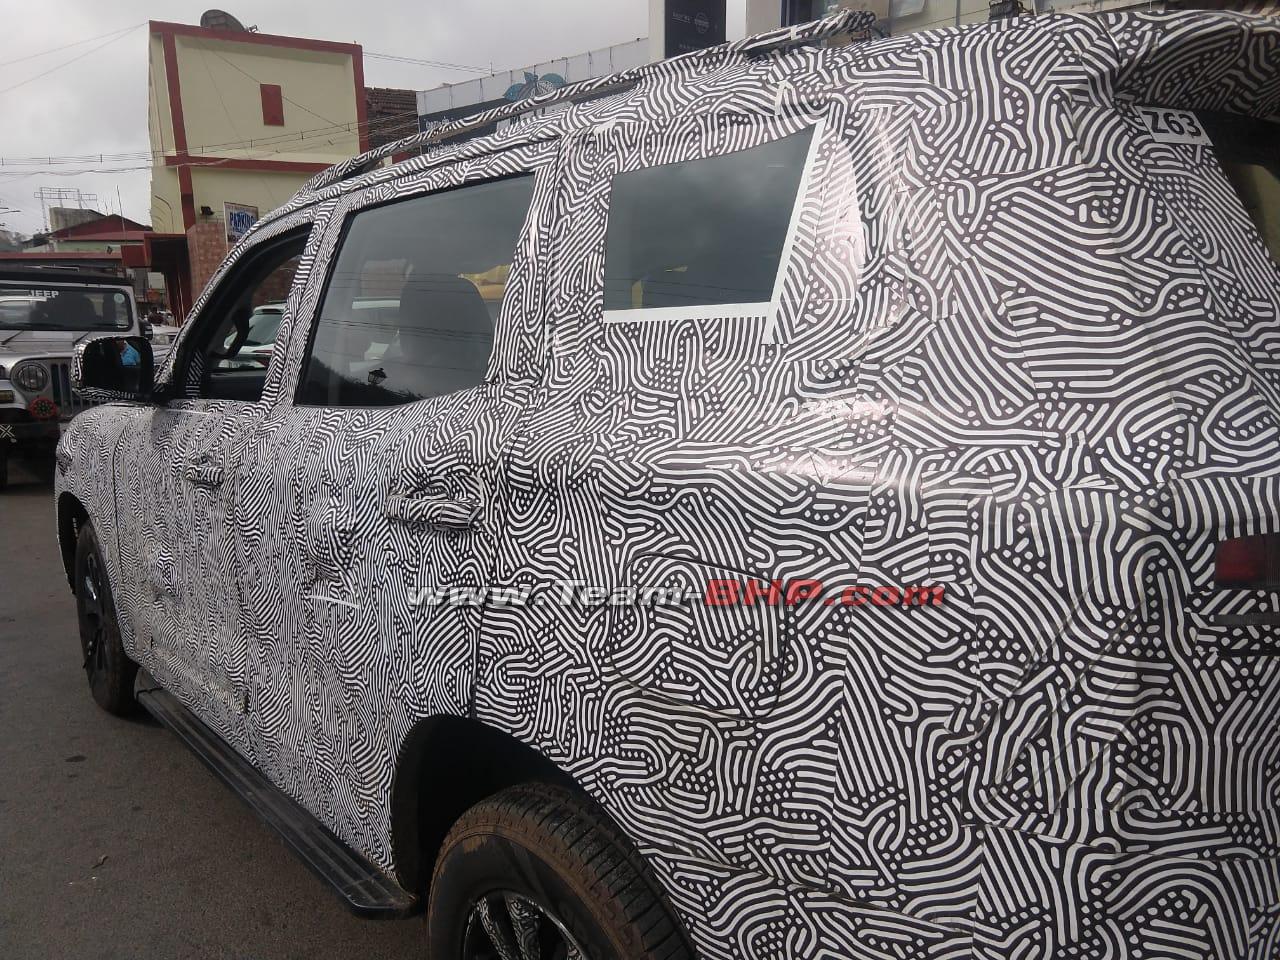 Next-Gen Mahindra Scorpio Likely to Go on Sale in India in Early 2022 - pic